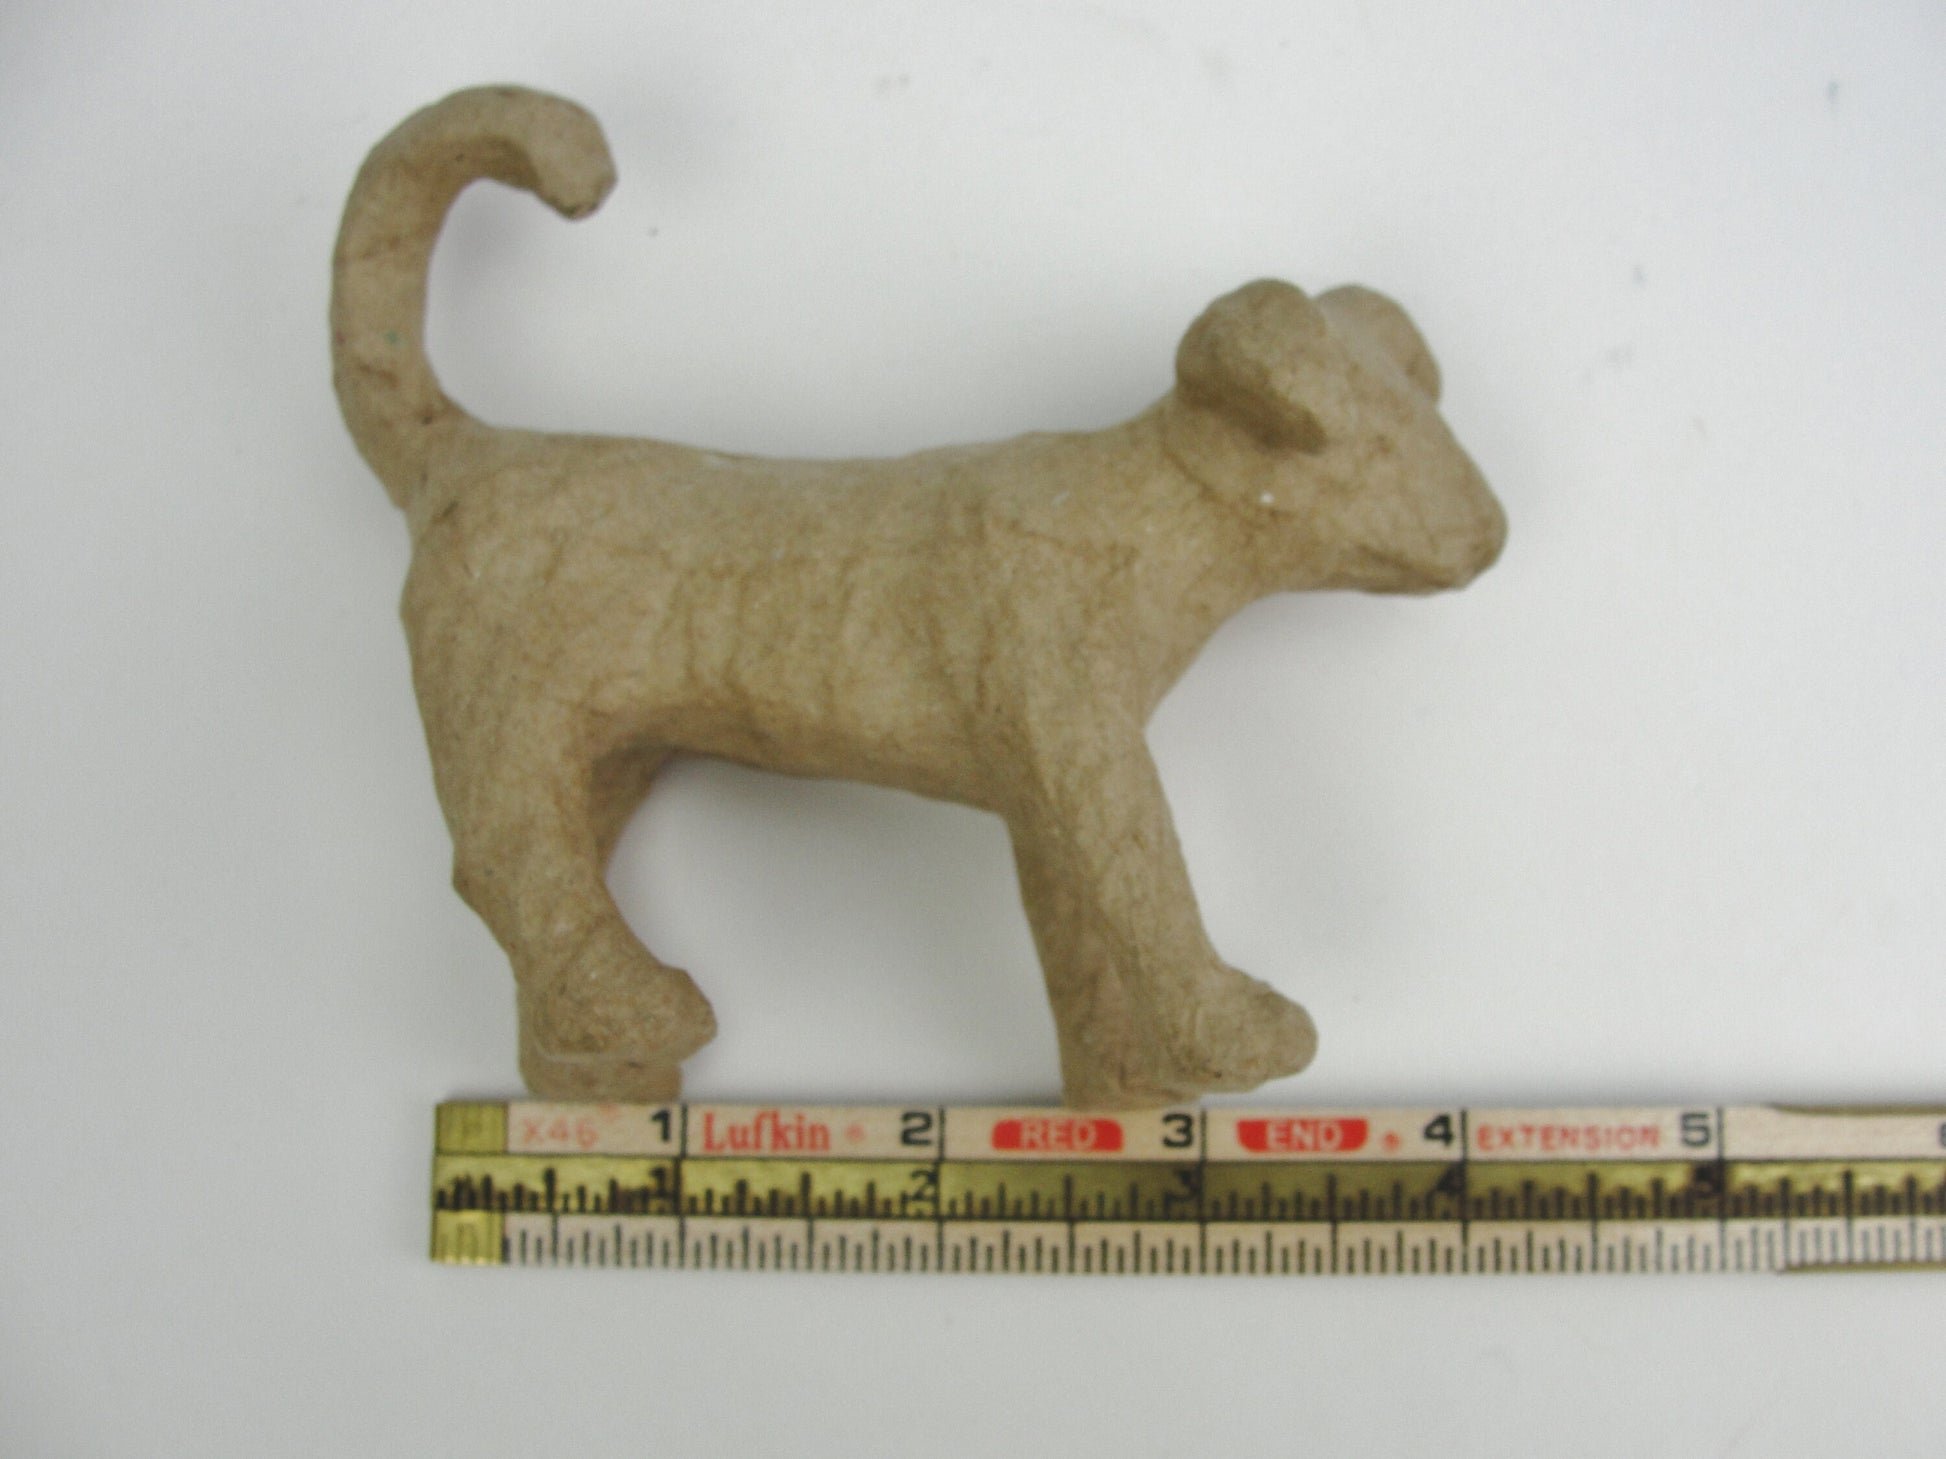 Decopatch Papier-Mache Small Animal Figurines - 4 1/2 to 5 - Jack Russel  Dog 